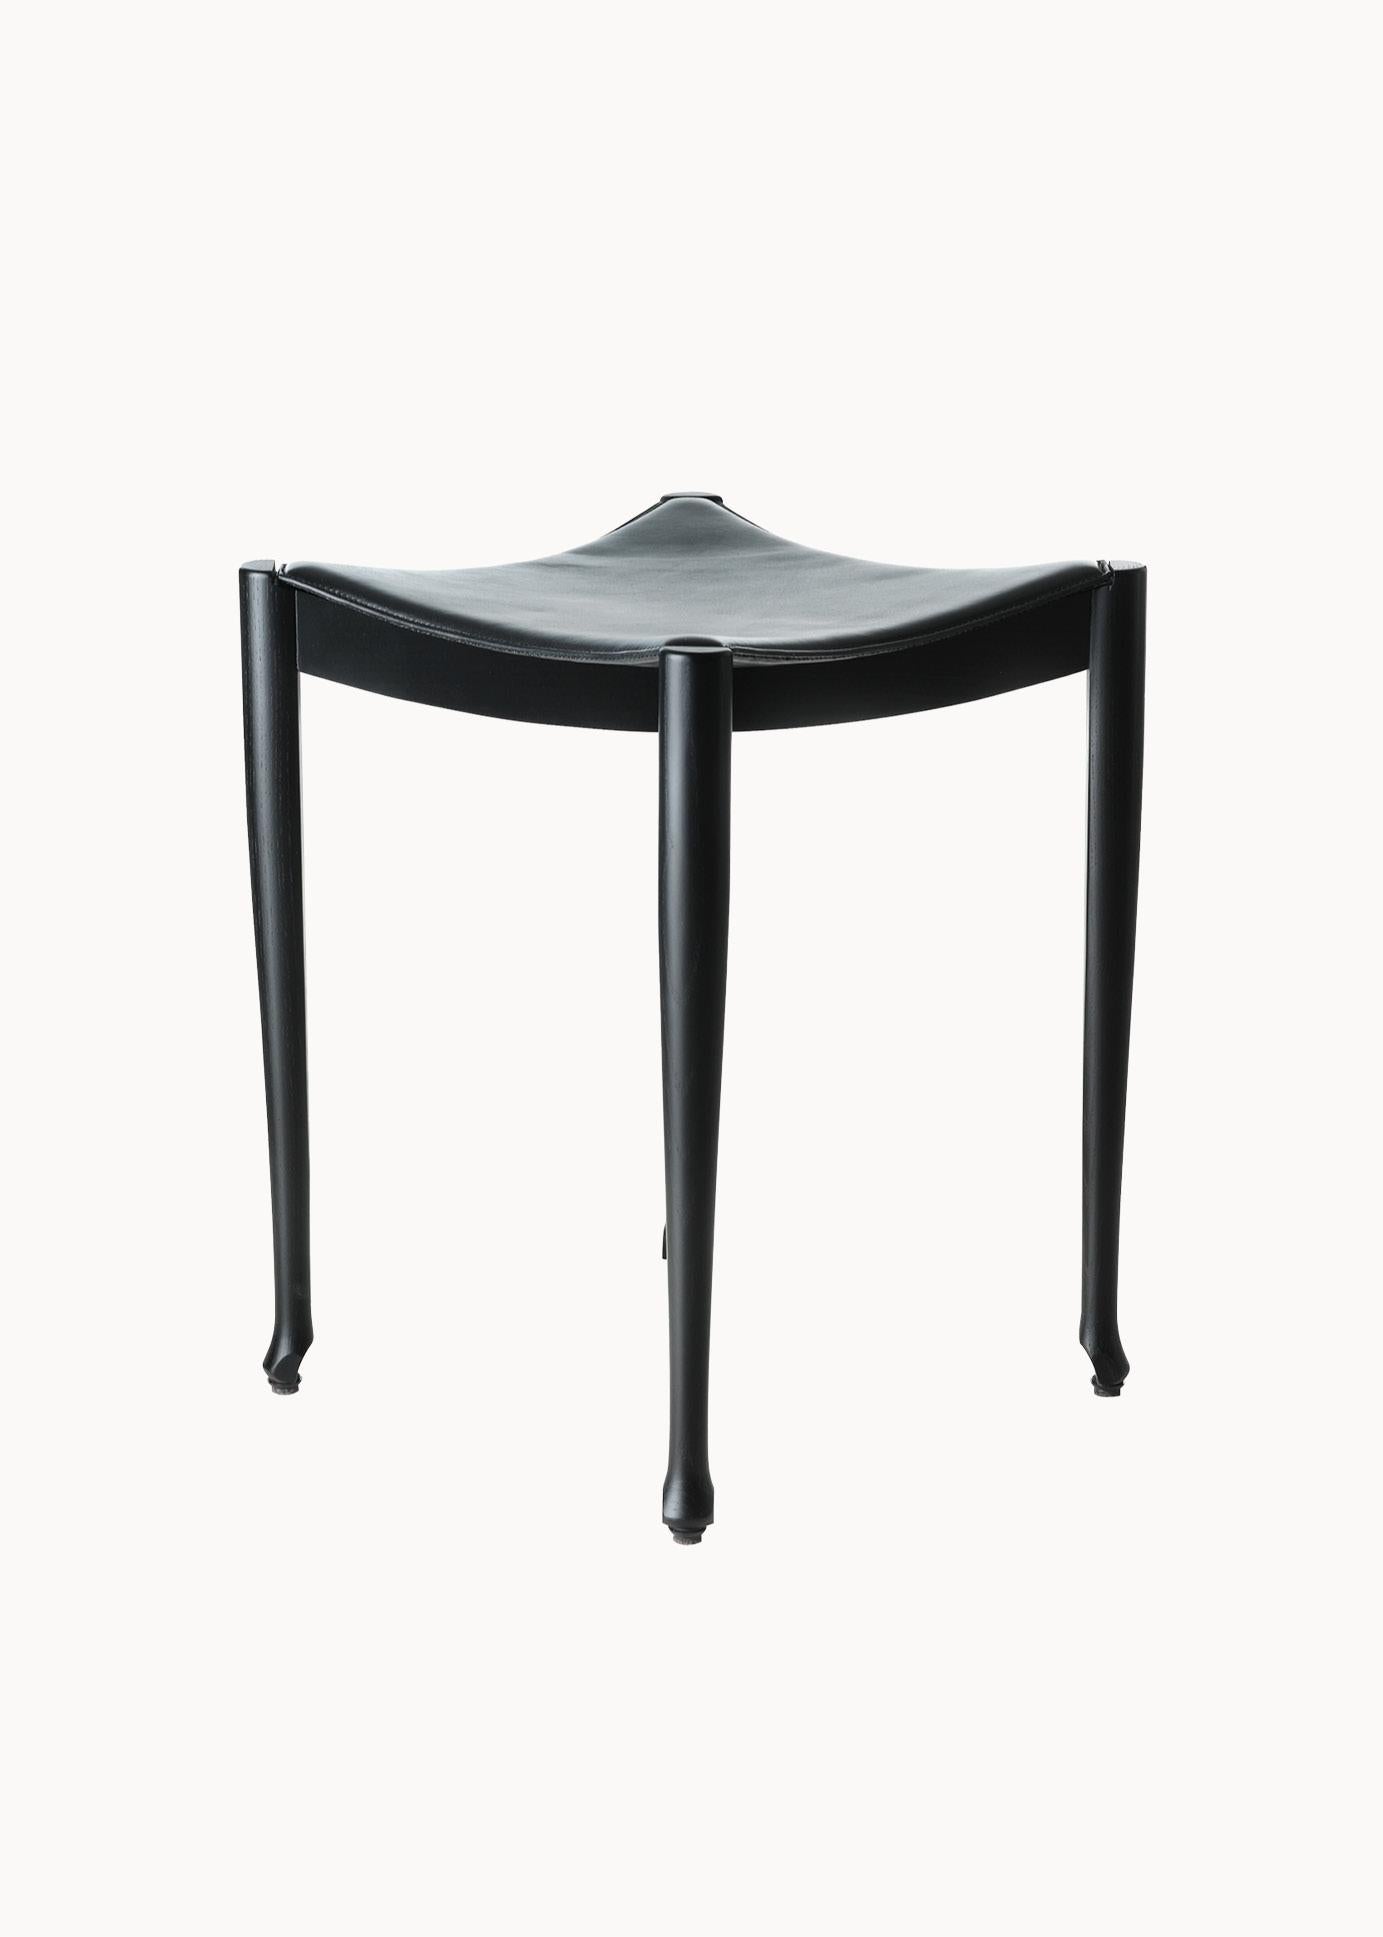 Gaulino stool by Oscar Tusquets, stained black ash wood, contemporary design In New Condition For Sale In Barcelona, ES